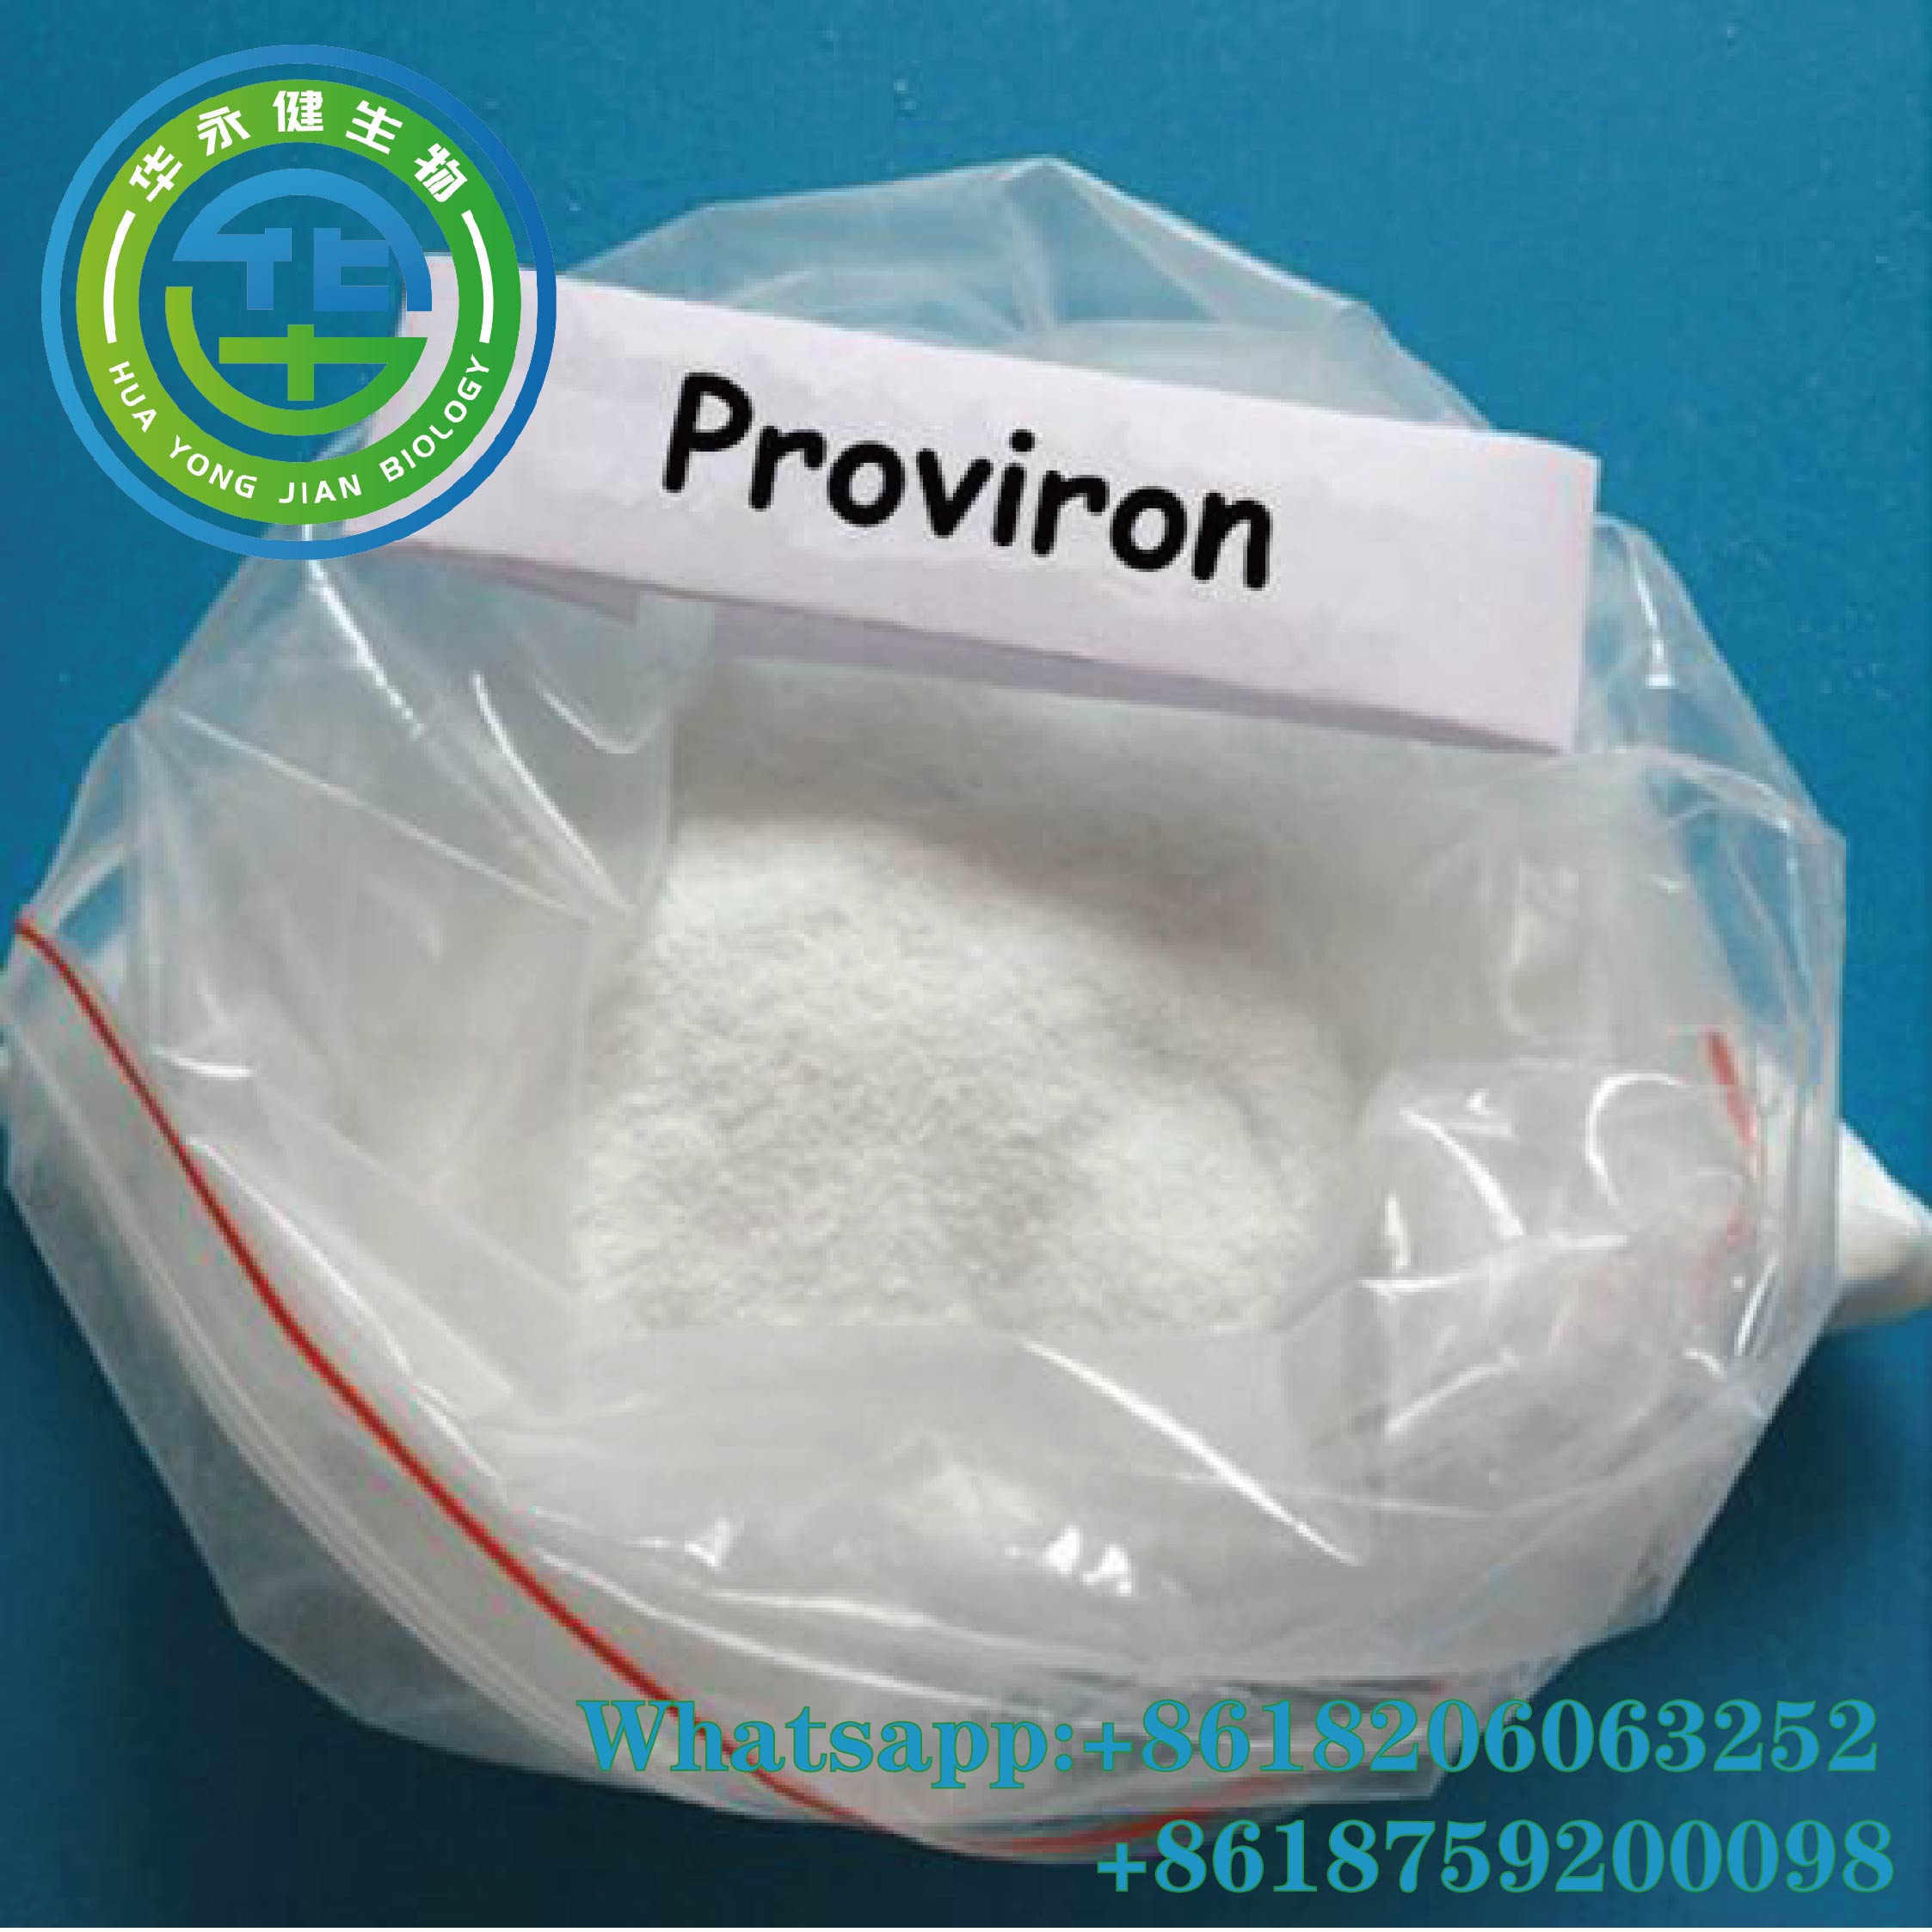 Proviron (Mesterolone)  in order to promote a much harder and far more defined physique.